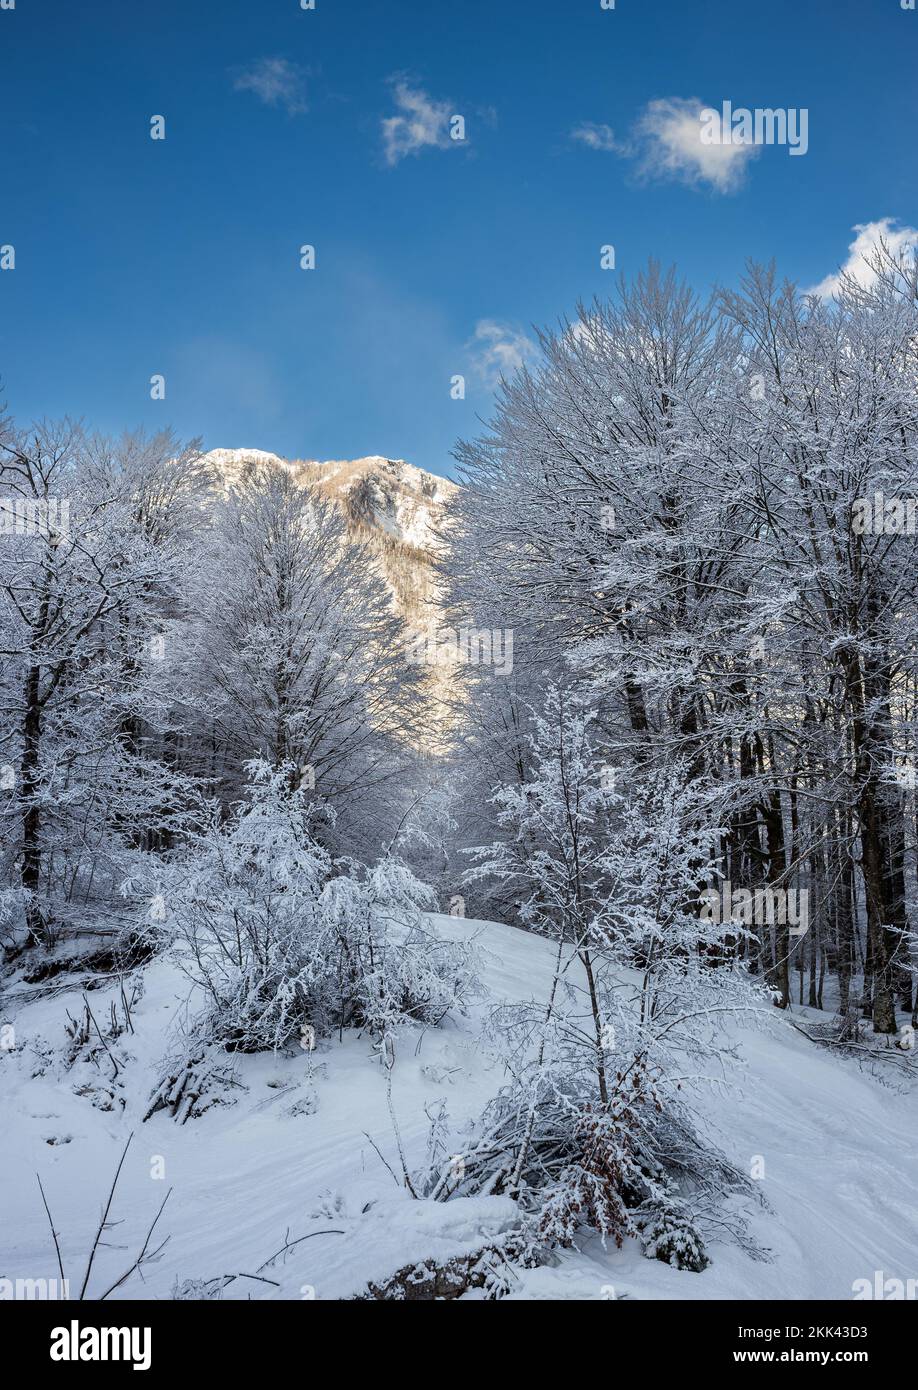 Vogel, Slovenia - Beautiful winter forest landscape at Vogel, Slovenia with sunny mountain and clear blue sky at background Stock Photo